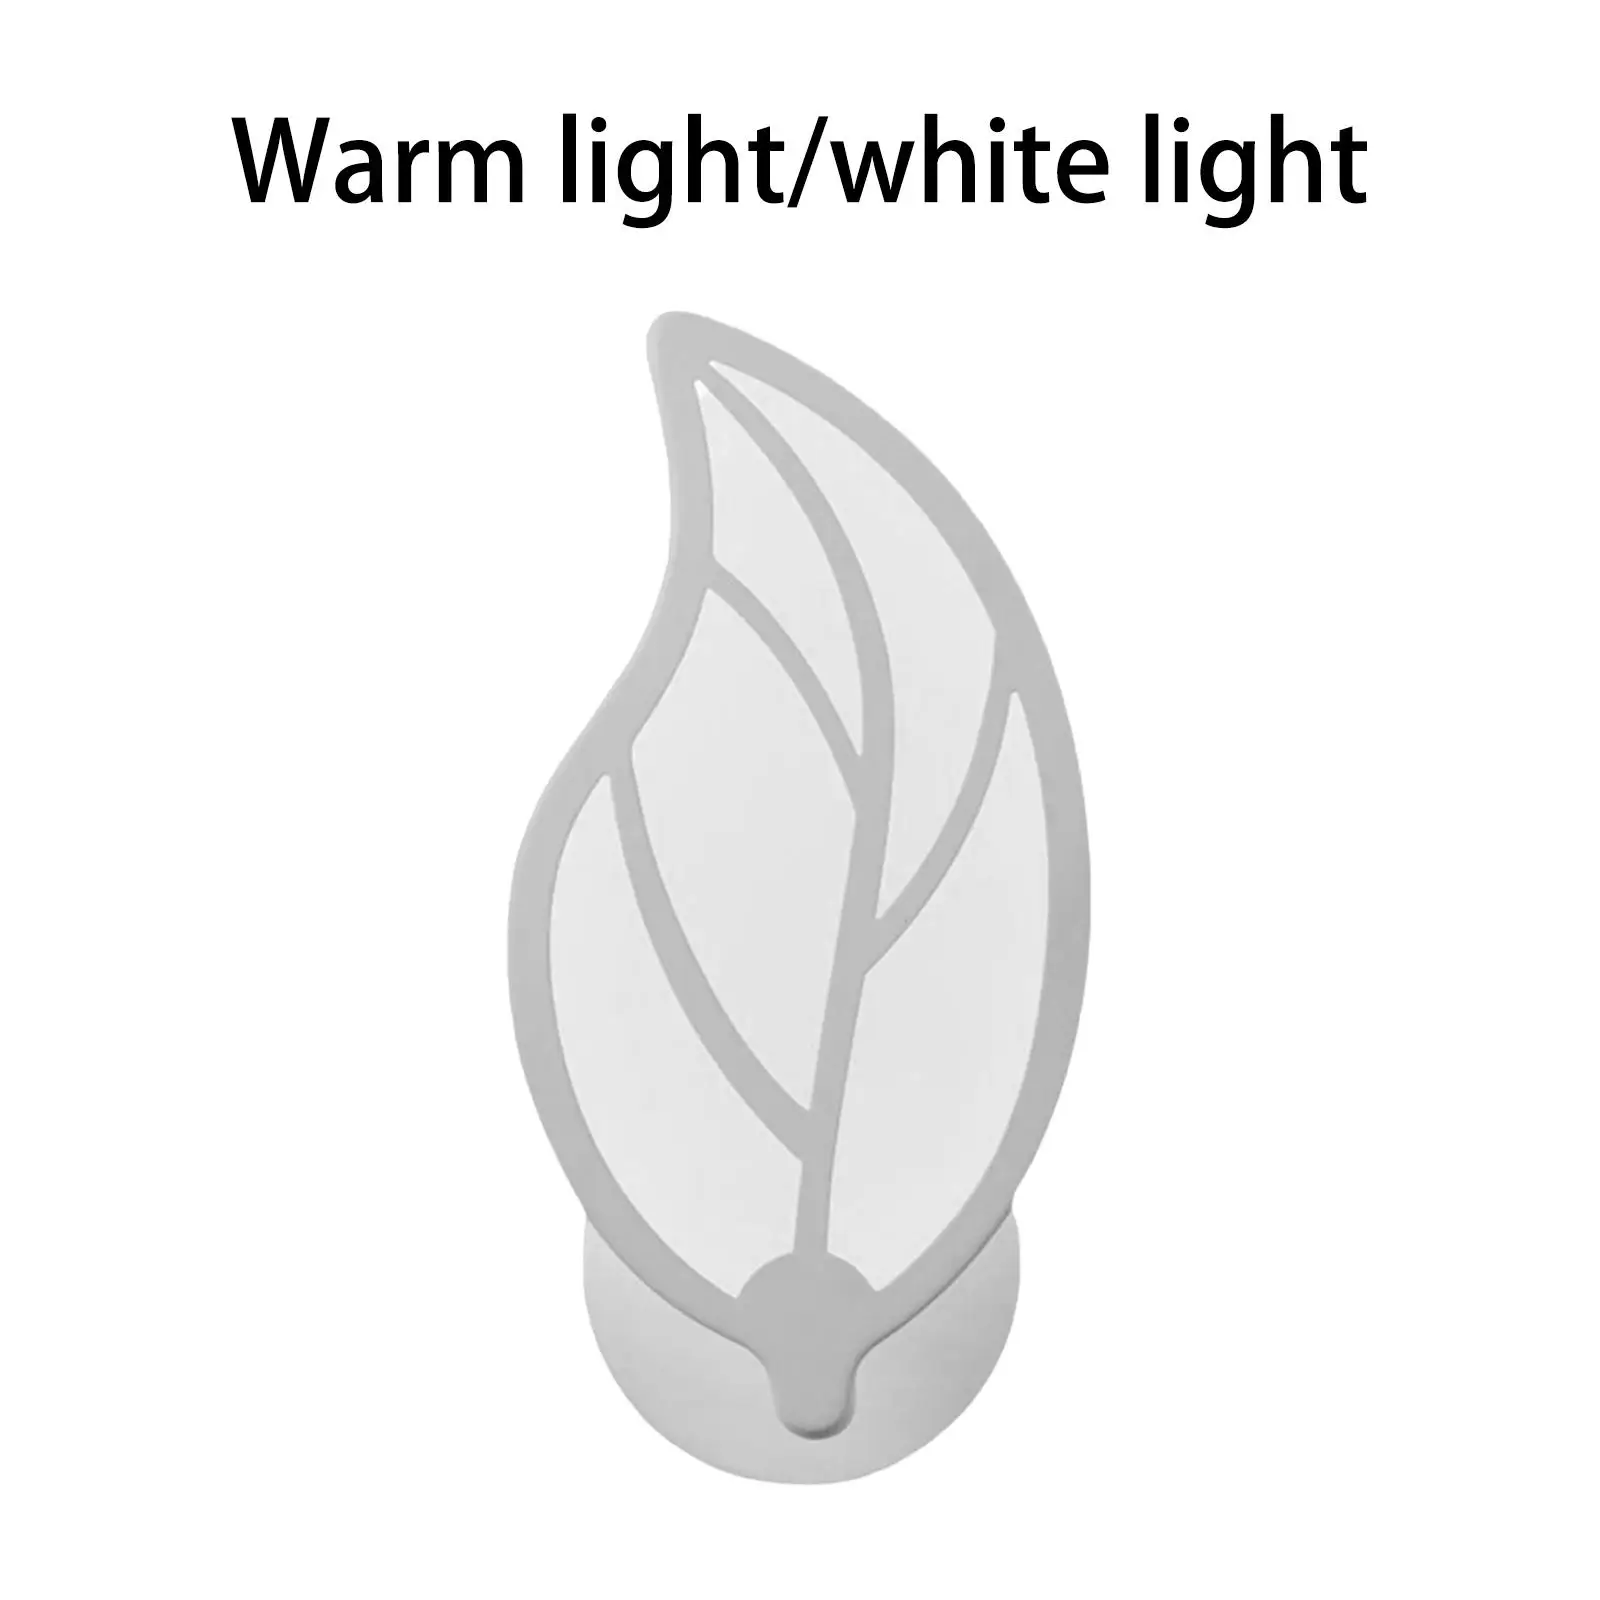 LED Wall Sconce Bedside Reading Light Leaves Shaped Wall Lamp for Home